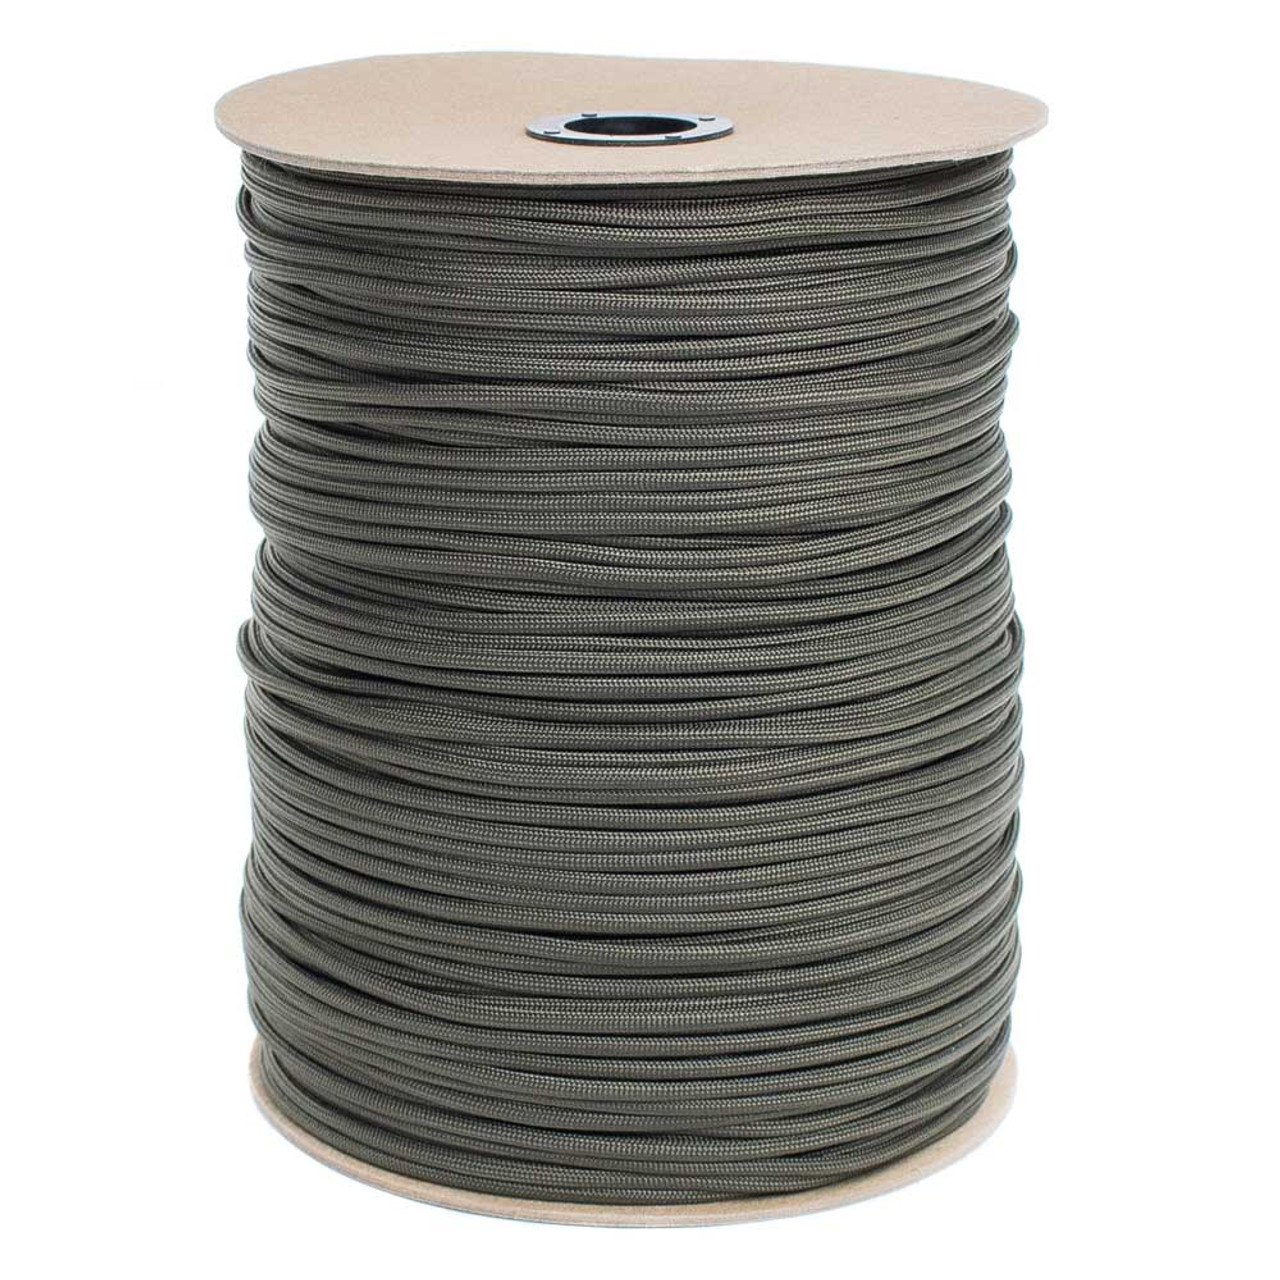 Olive Drab (OD) 650 Coreless or Hollow Flat Nylon Cord Made in the